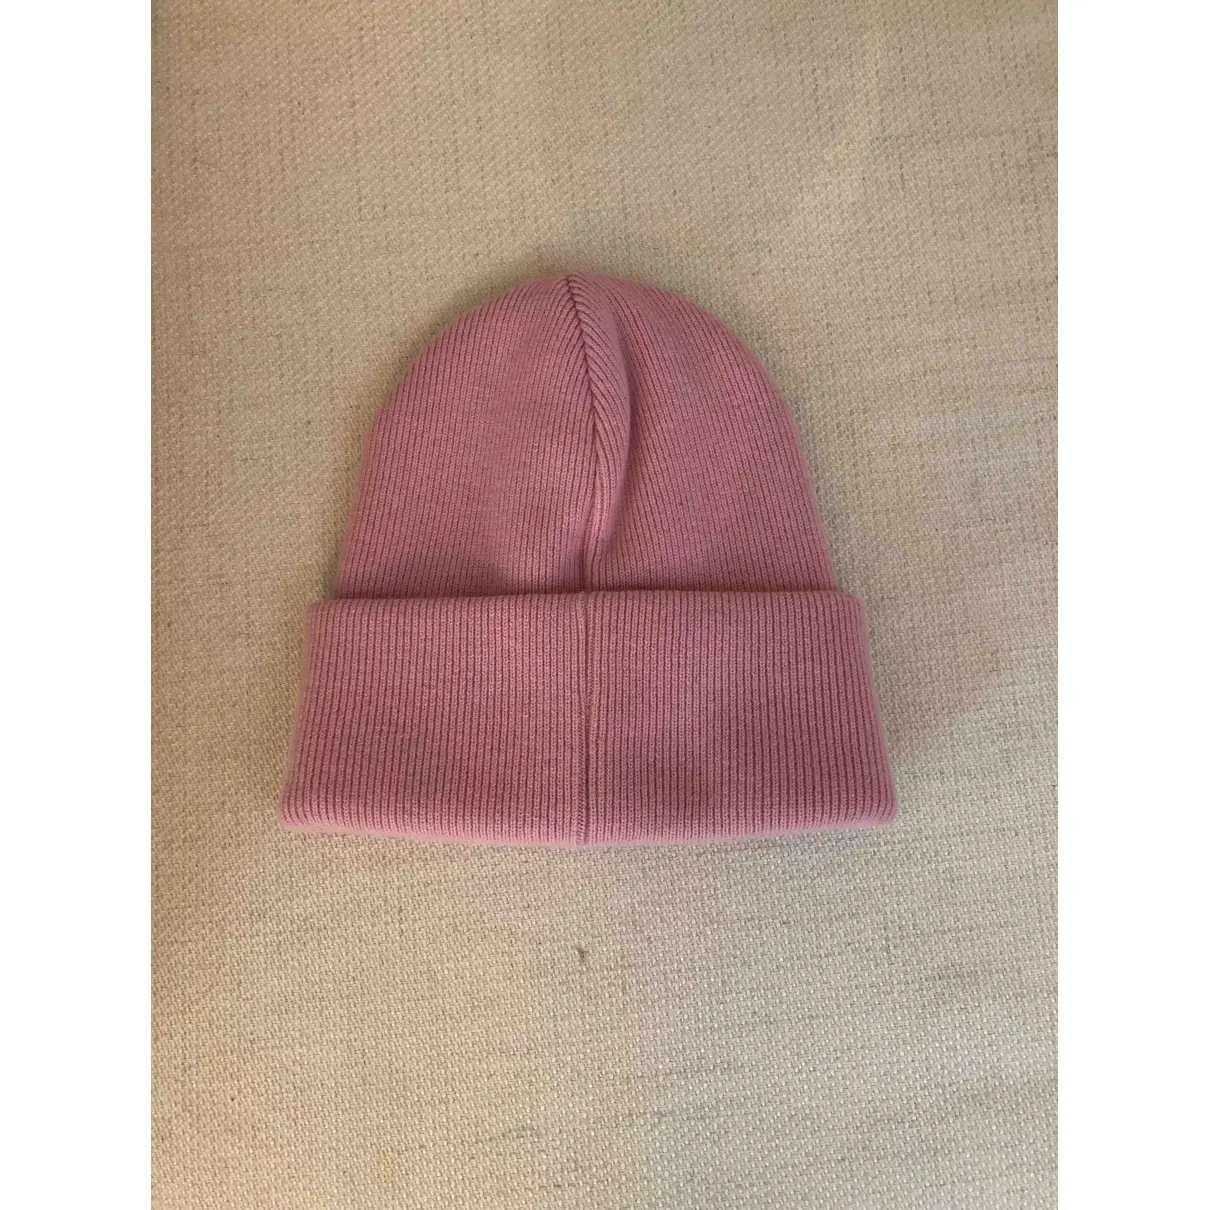 Buy Dsquared2 Wool beanie online